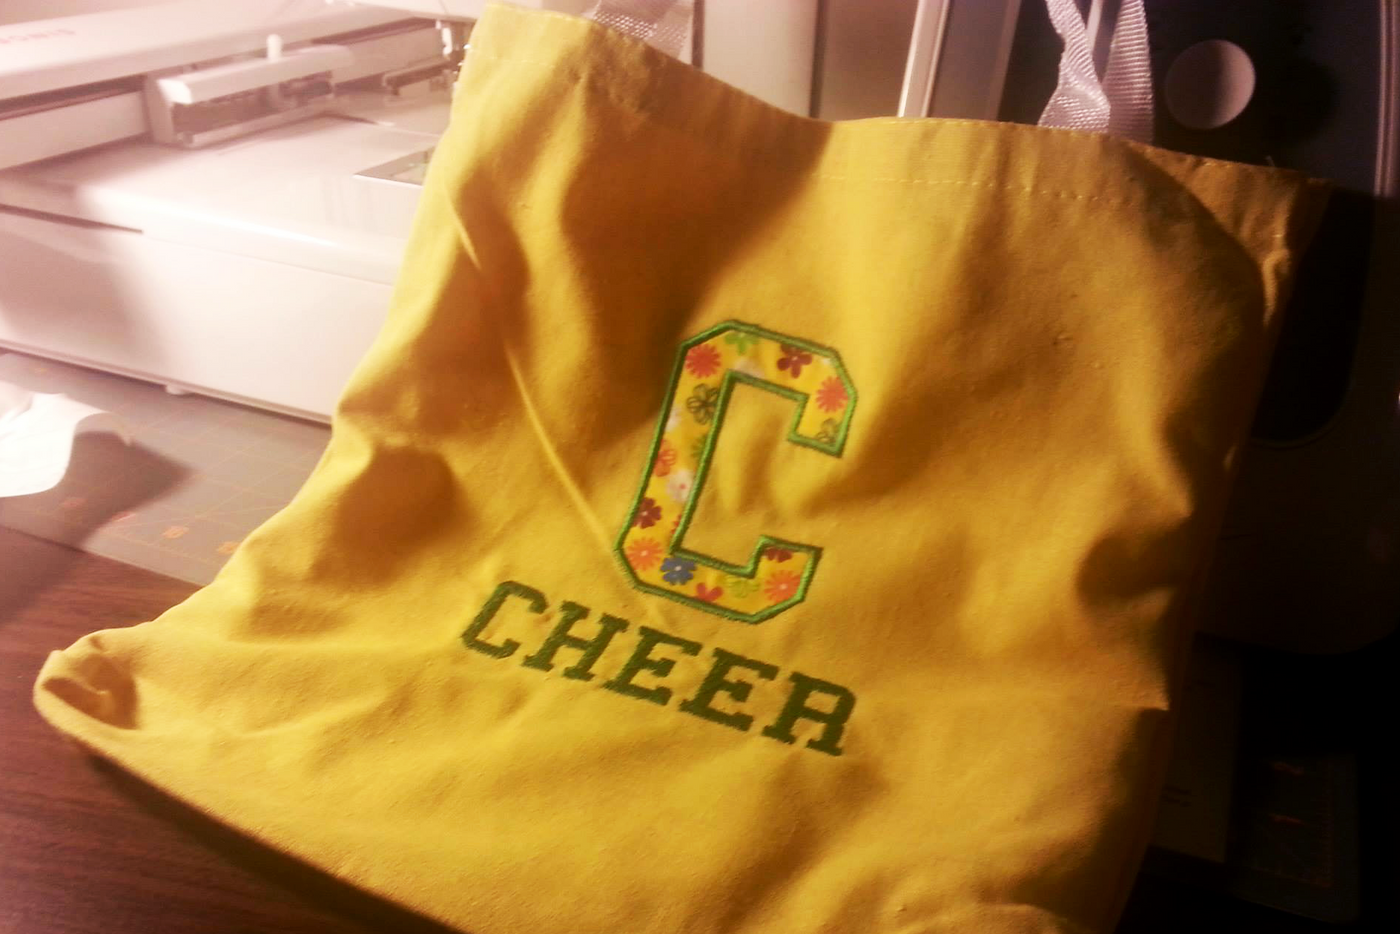 A yellow tote bag with the word "CHEER" embroidered onto it. Above is an applique letter C.